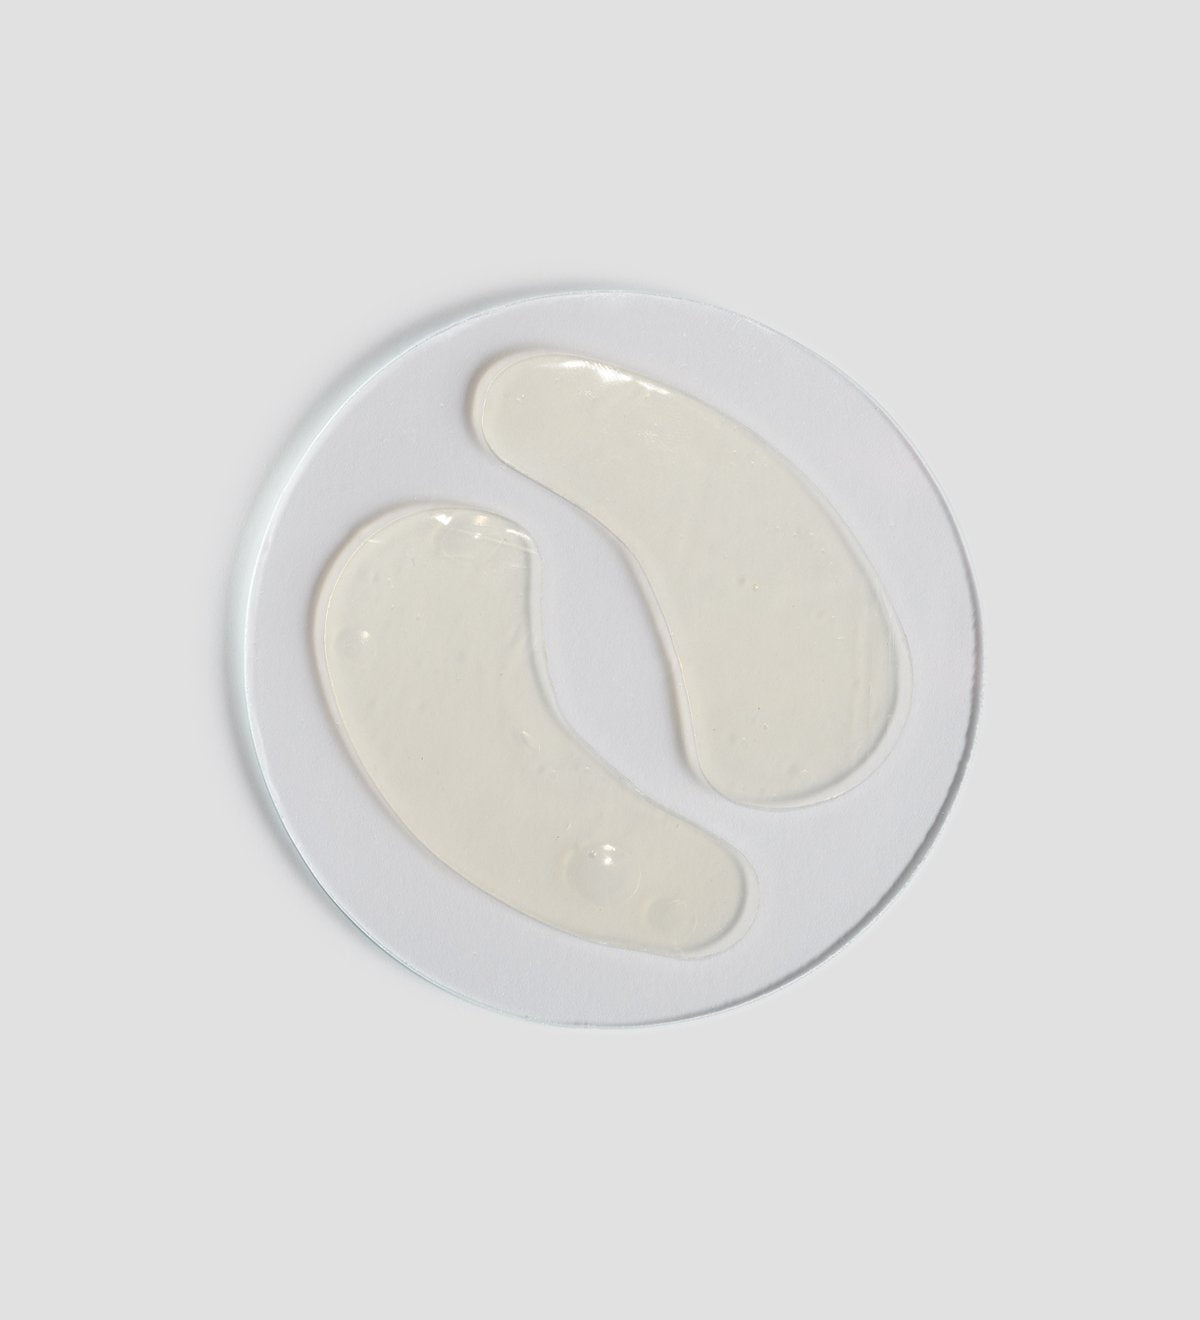 Comfort Zone Sublime Skin Eye Patch